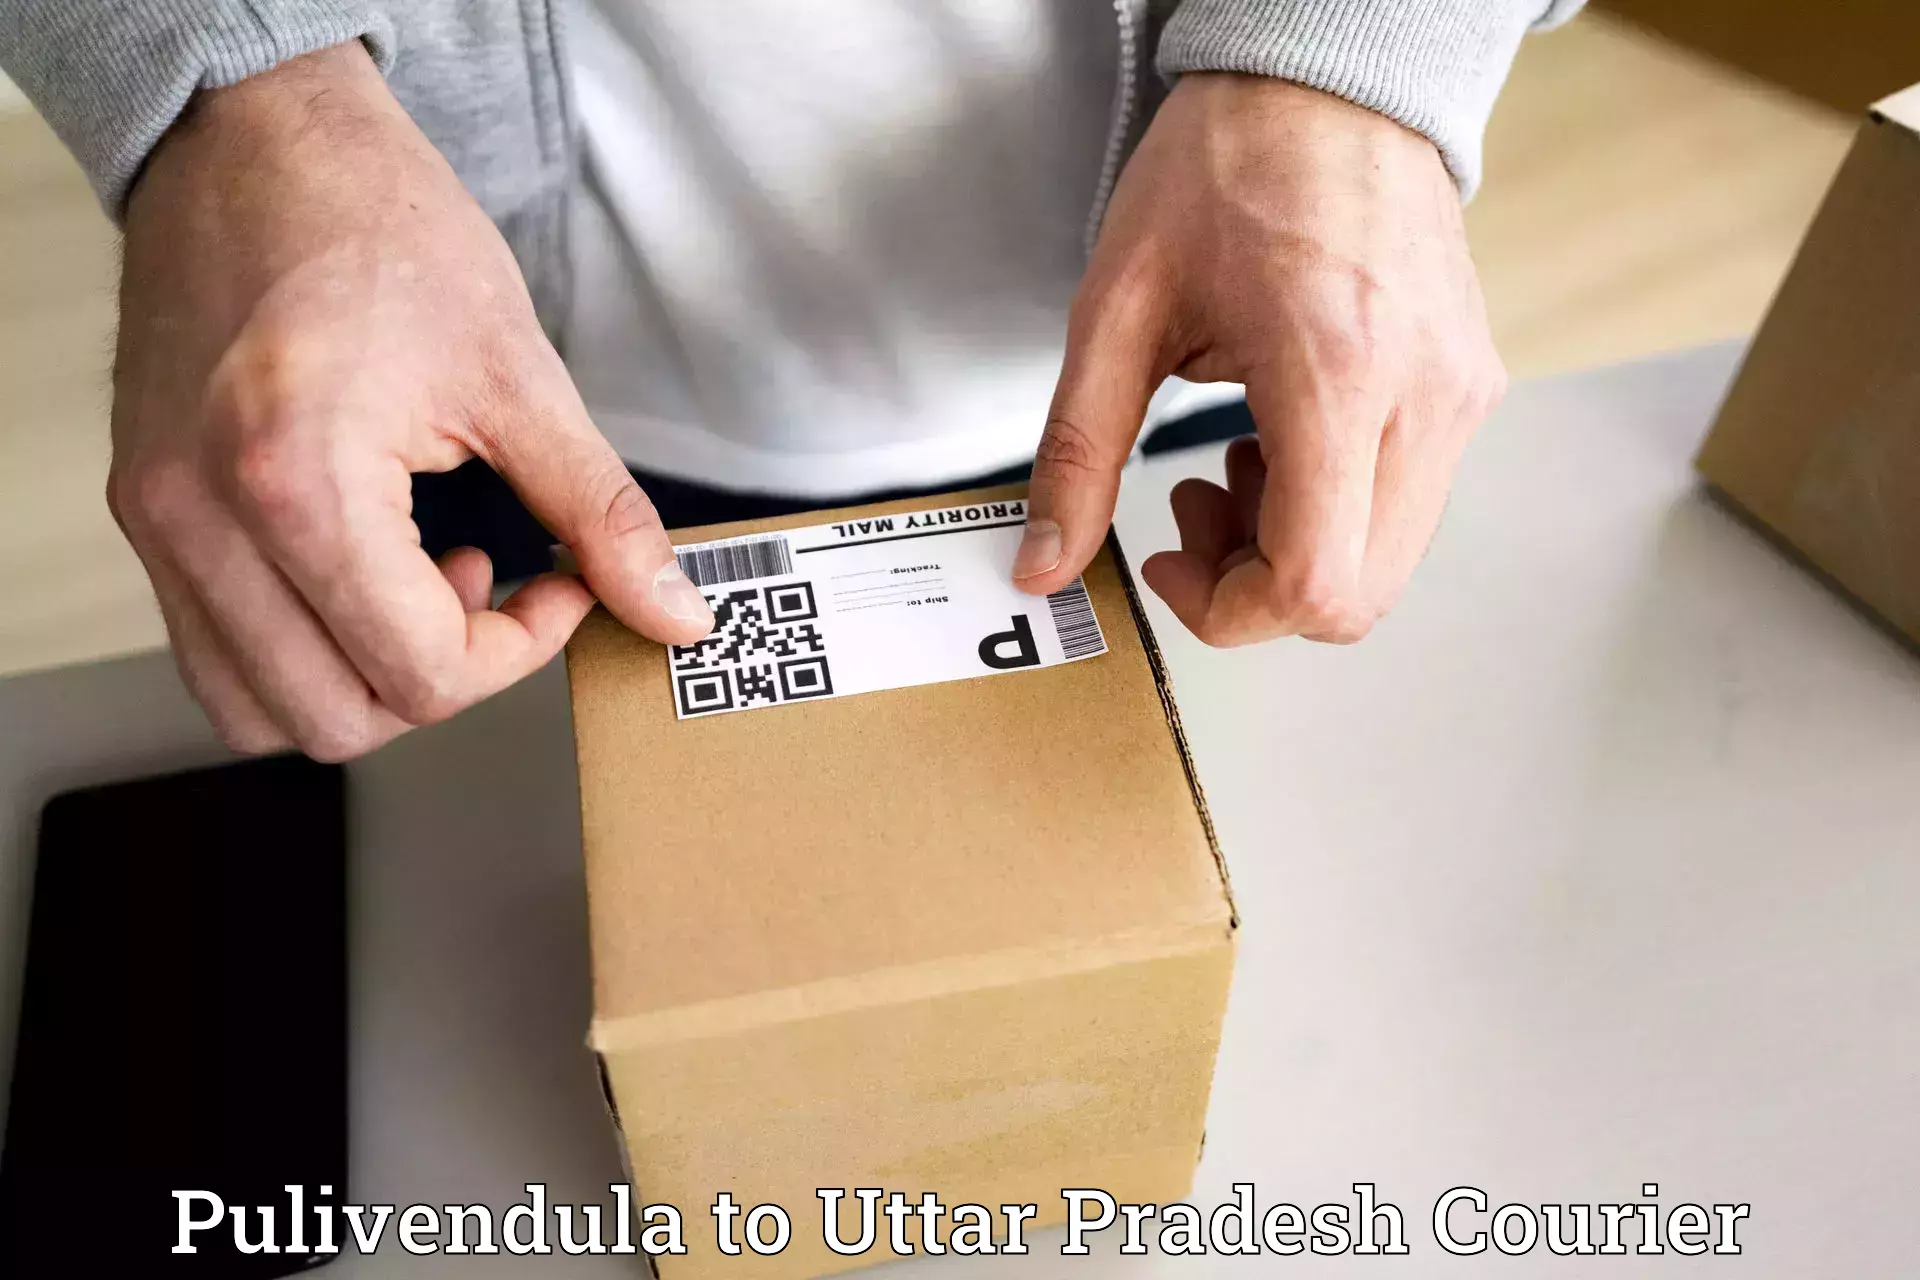 Personal parcel delivery Pulivendula to Aligarh Muslim University